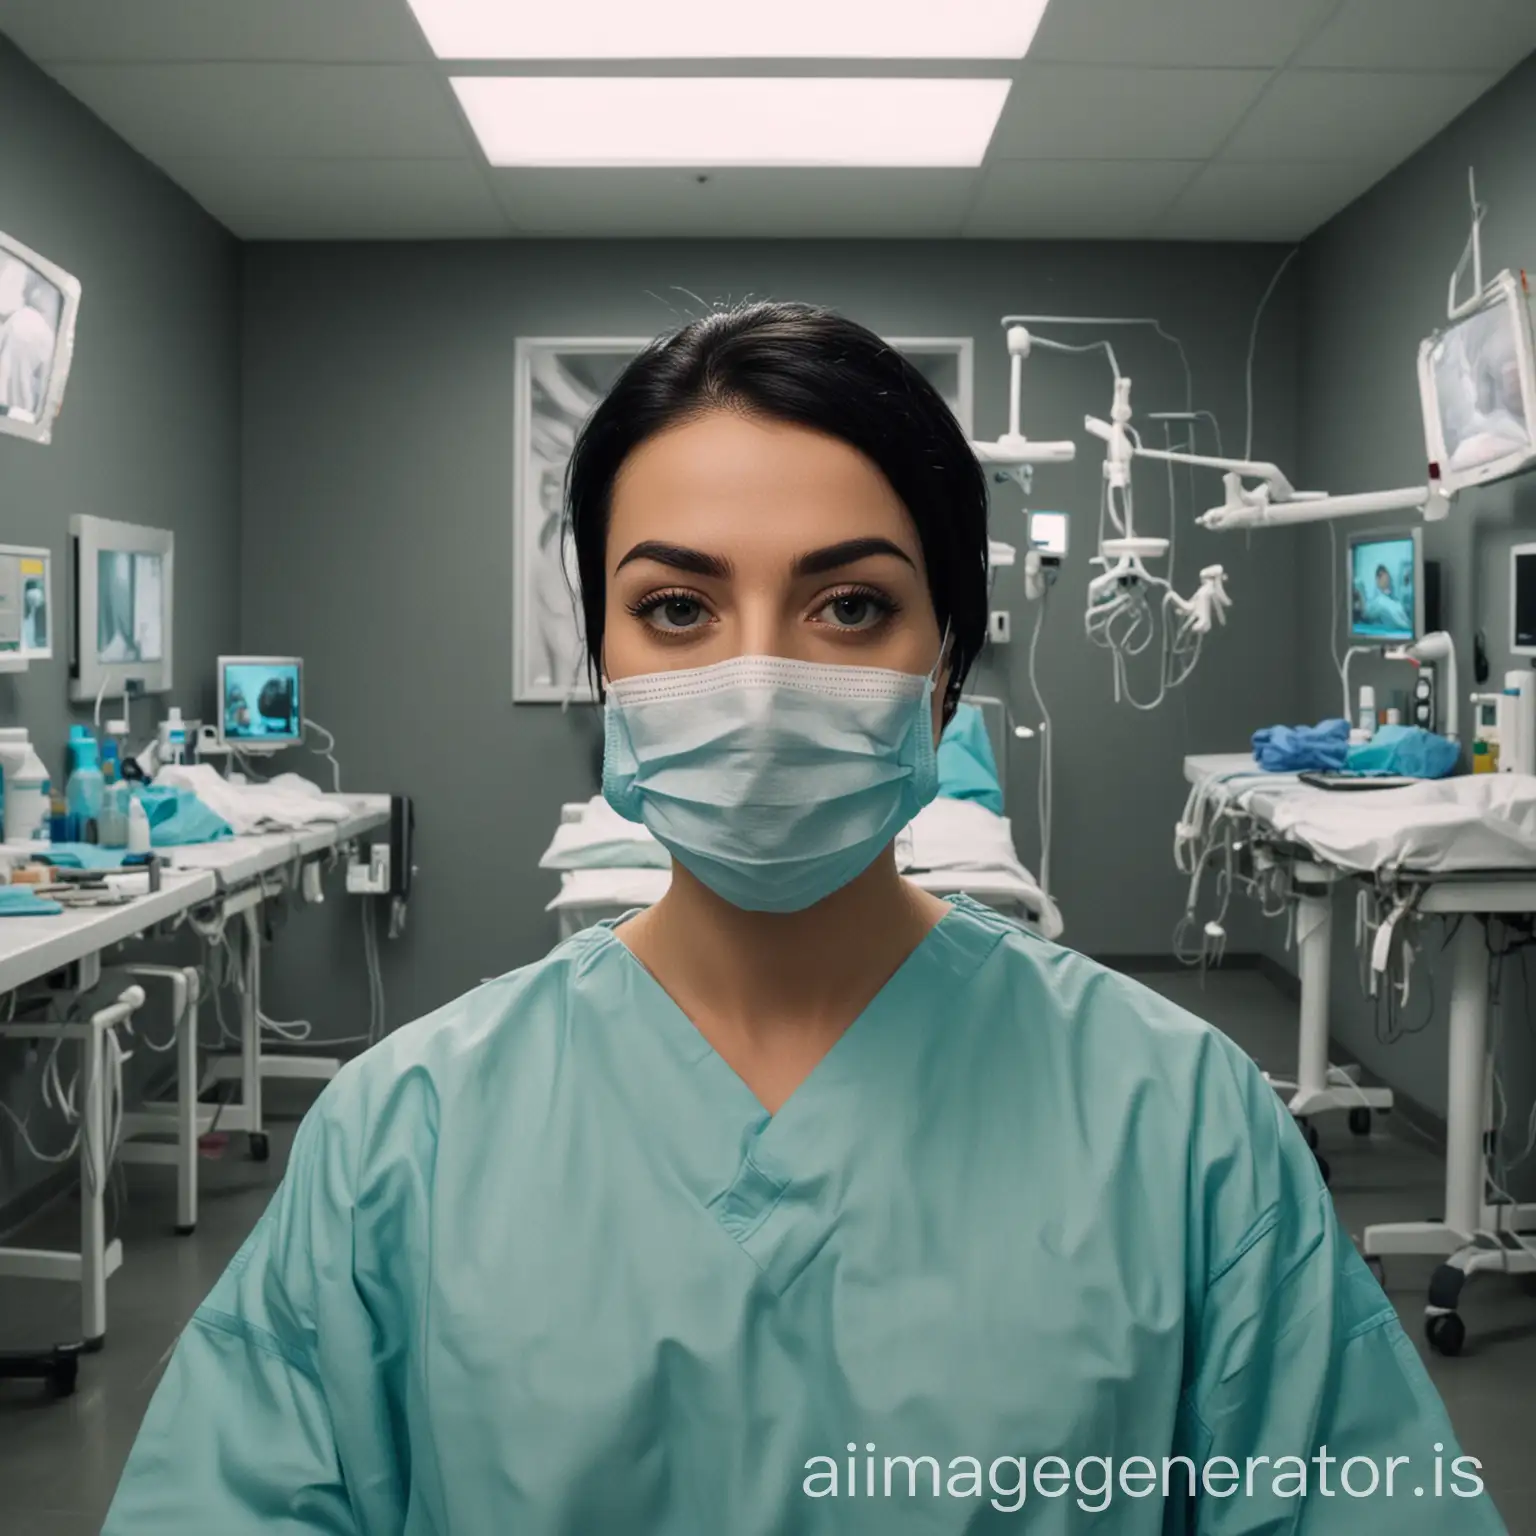 make a YouTube thumbnail without text in picture show black hair market transplant in turkey and around world. make it really realistic make it surgery room fake surgeon